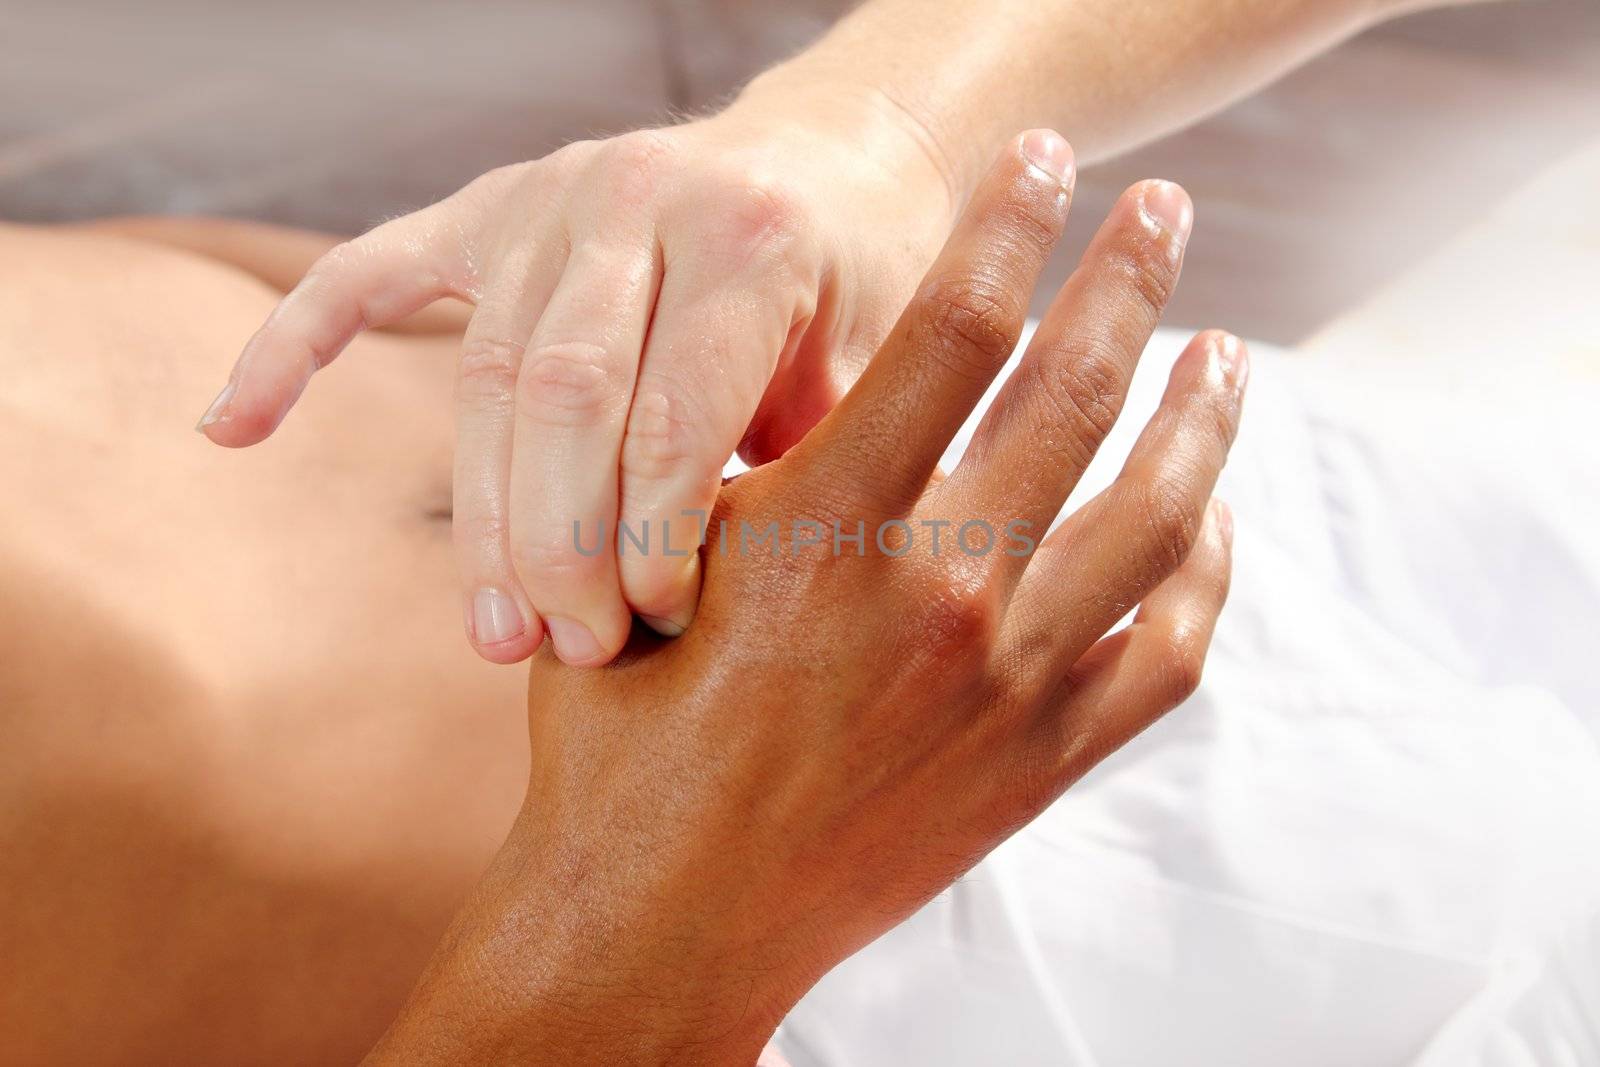 digital pressure hands reflexology massage tuina therapy physiotherapy